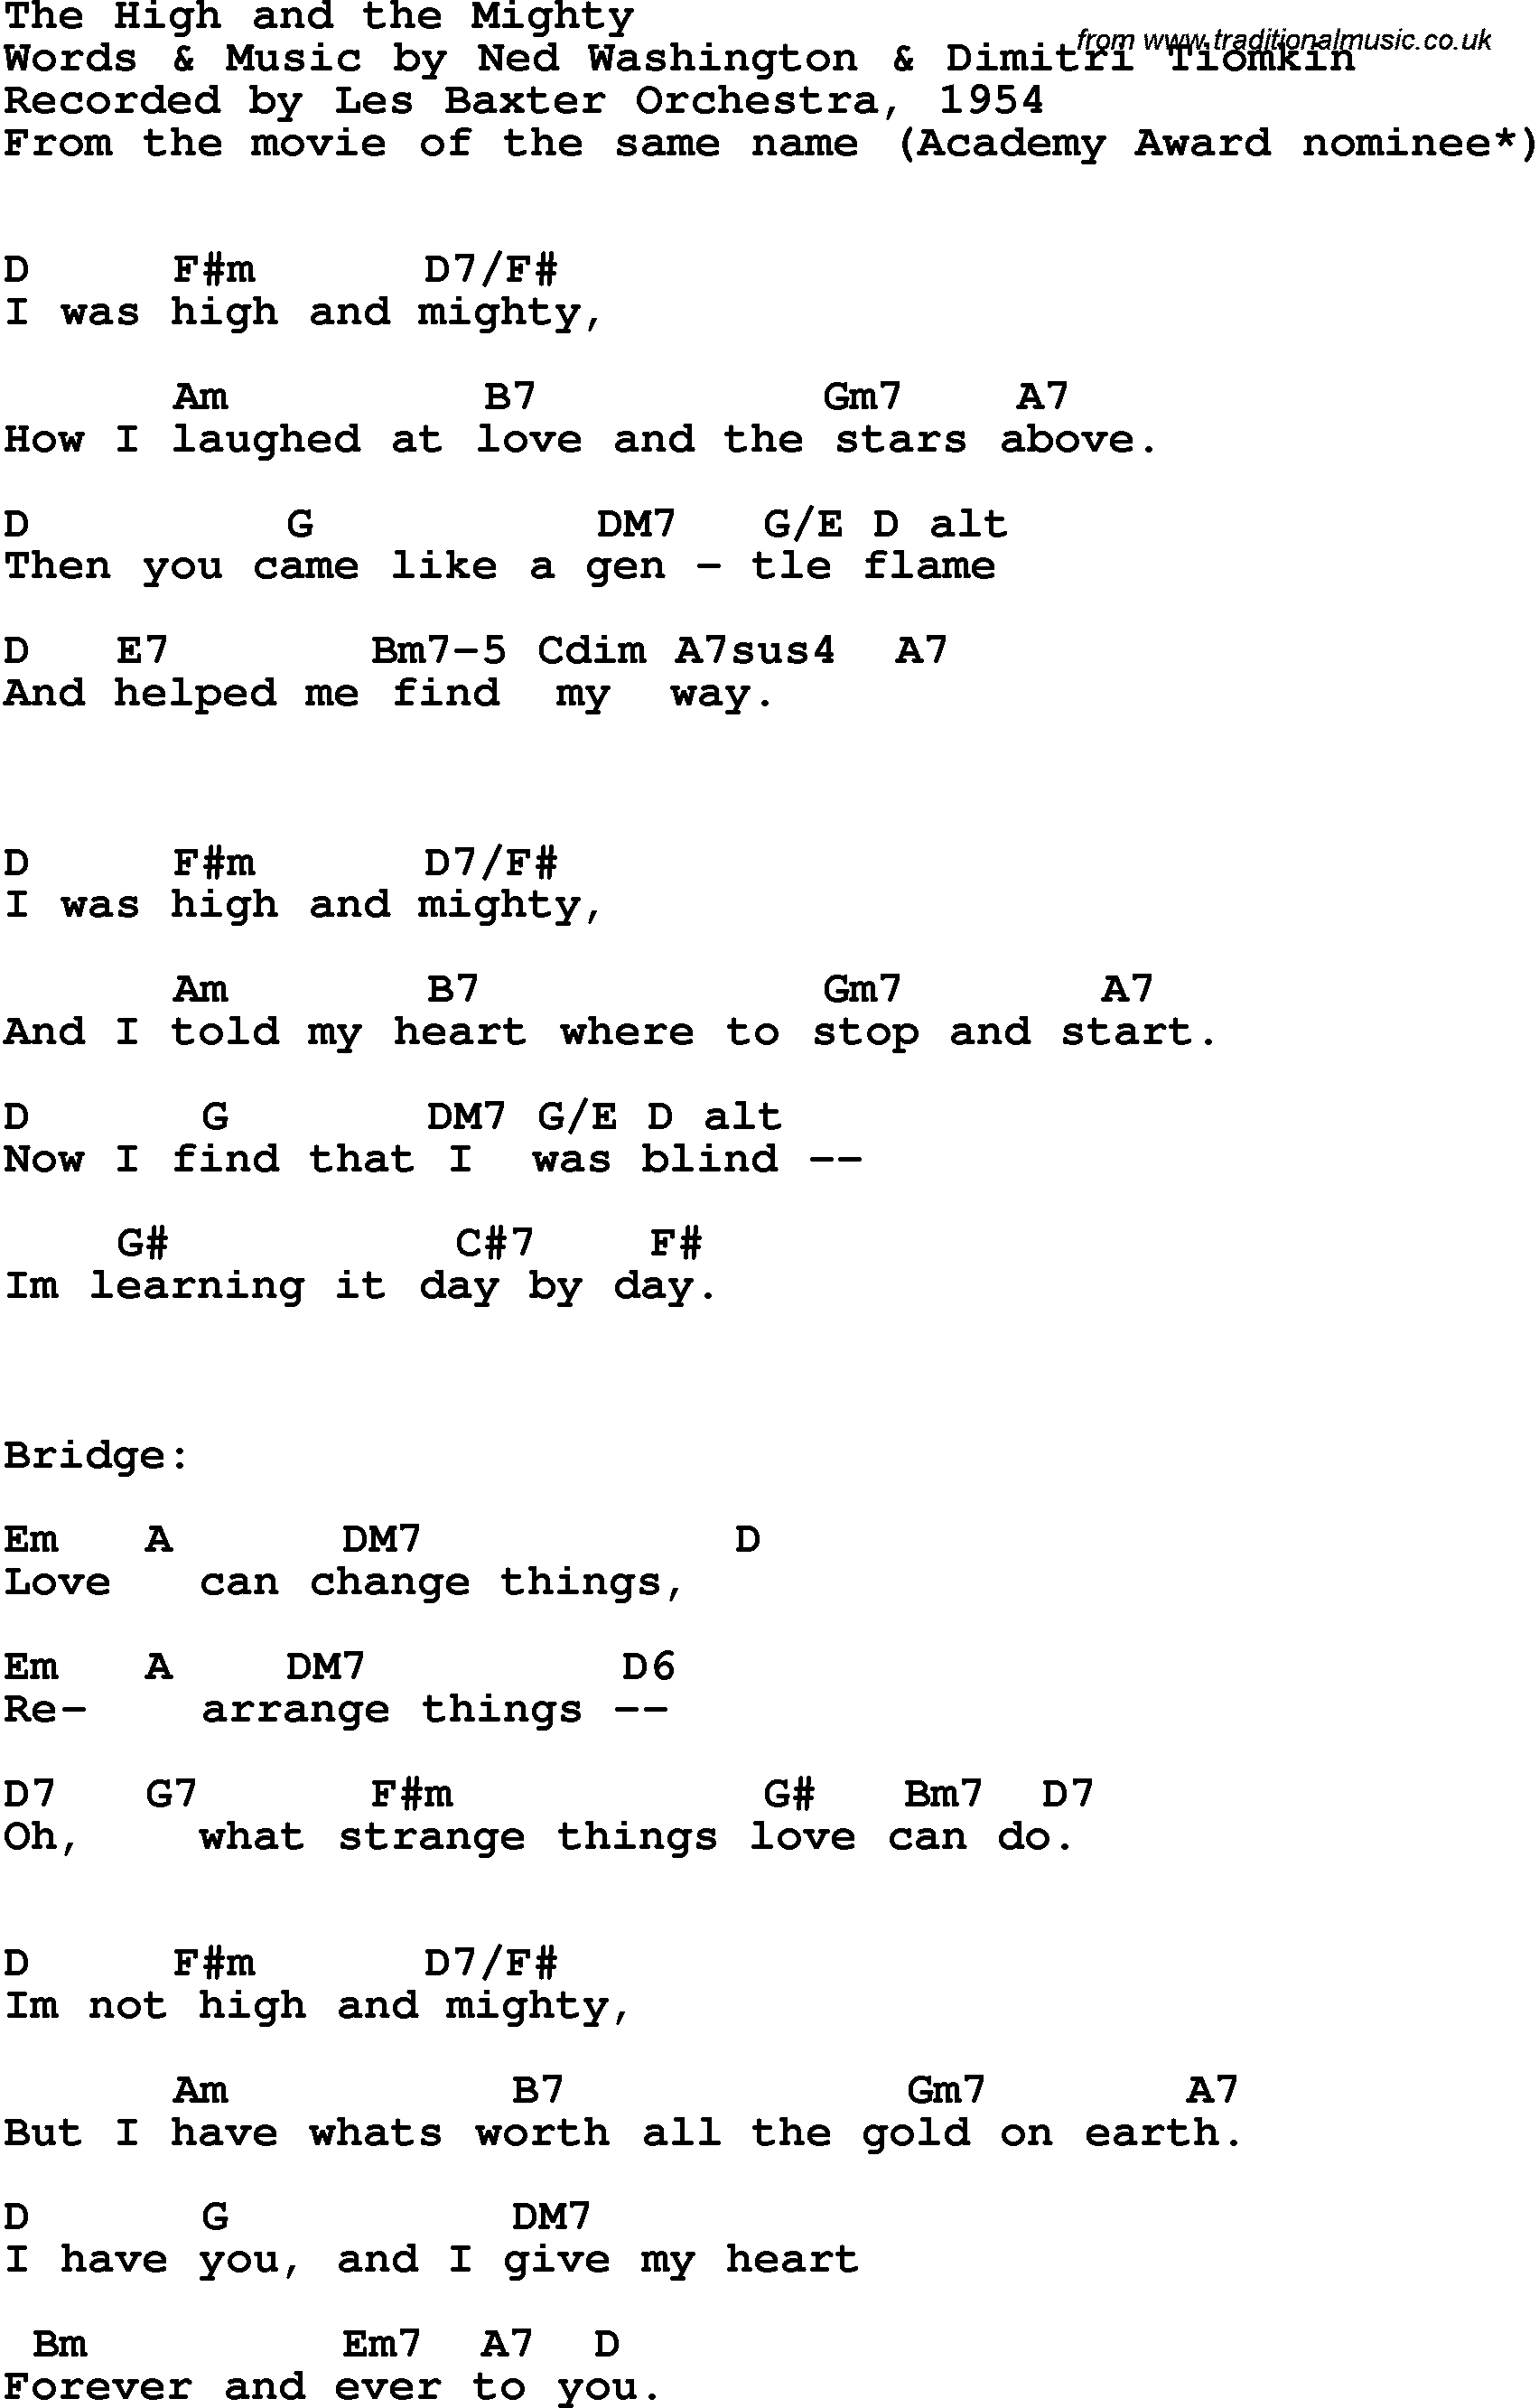 Song Lyrics with guitar chords for High And The Mighty, The - Les Baxter, 1954